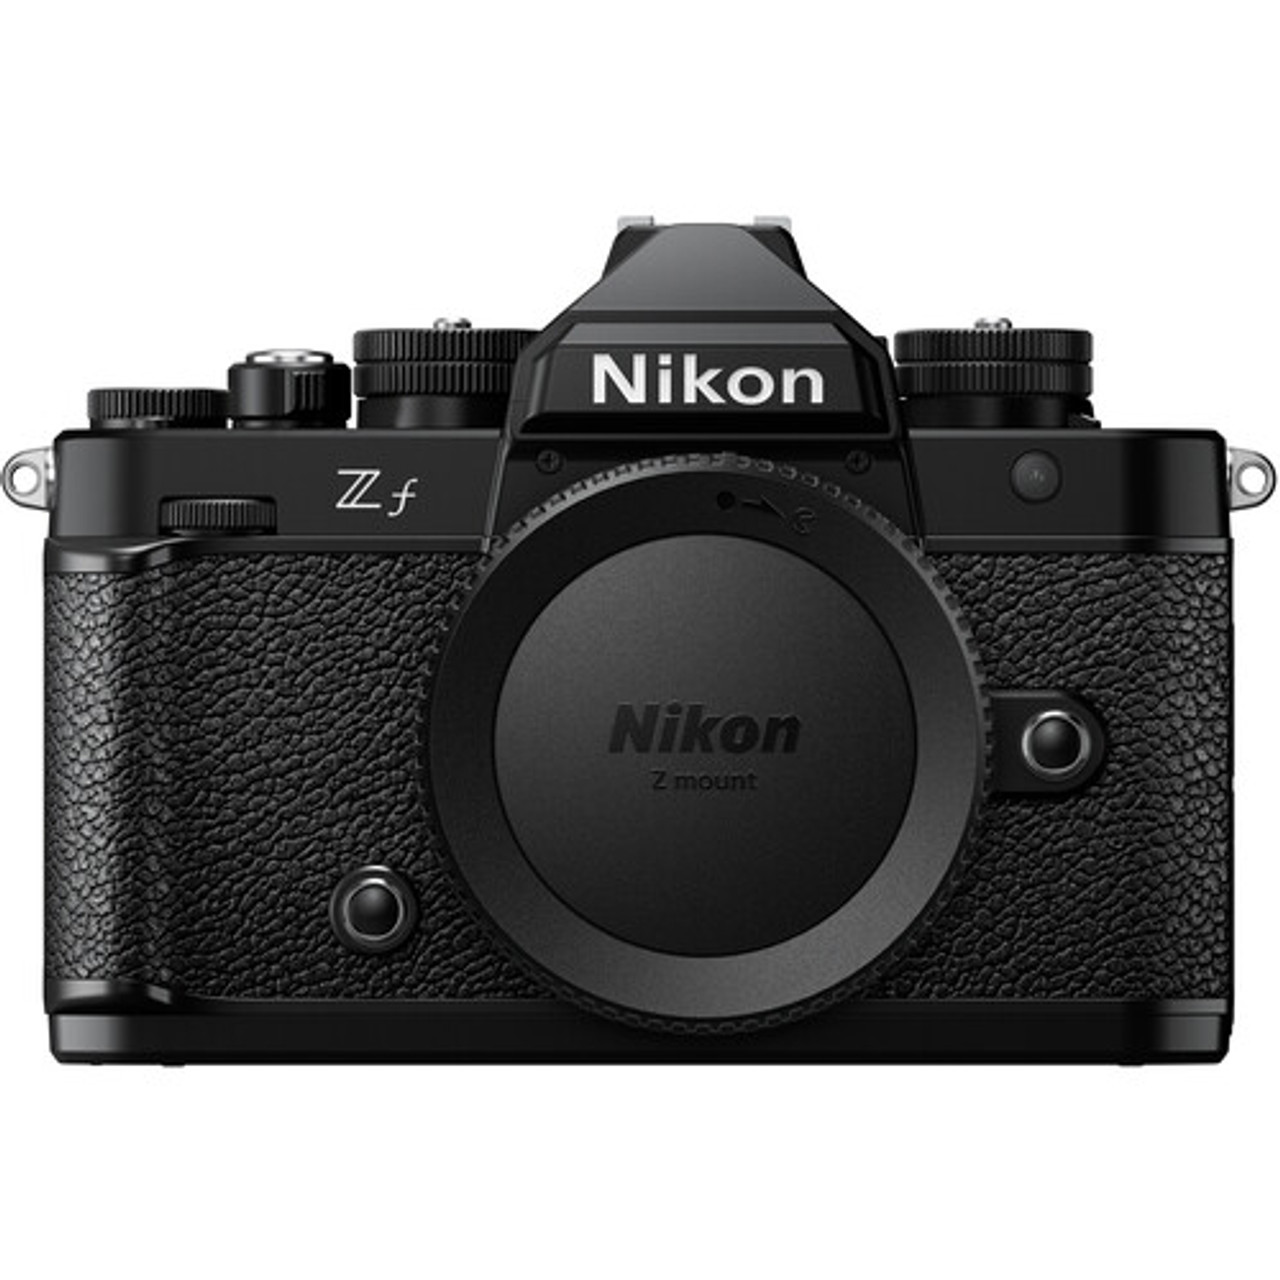  Nikon Z f with Special Edition Prime Lens, Full-Frame  Mirrorless Stills/Video Camera with Fast 40mm f/2 Lens